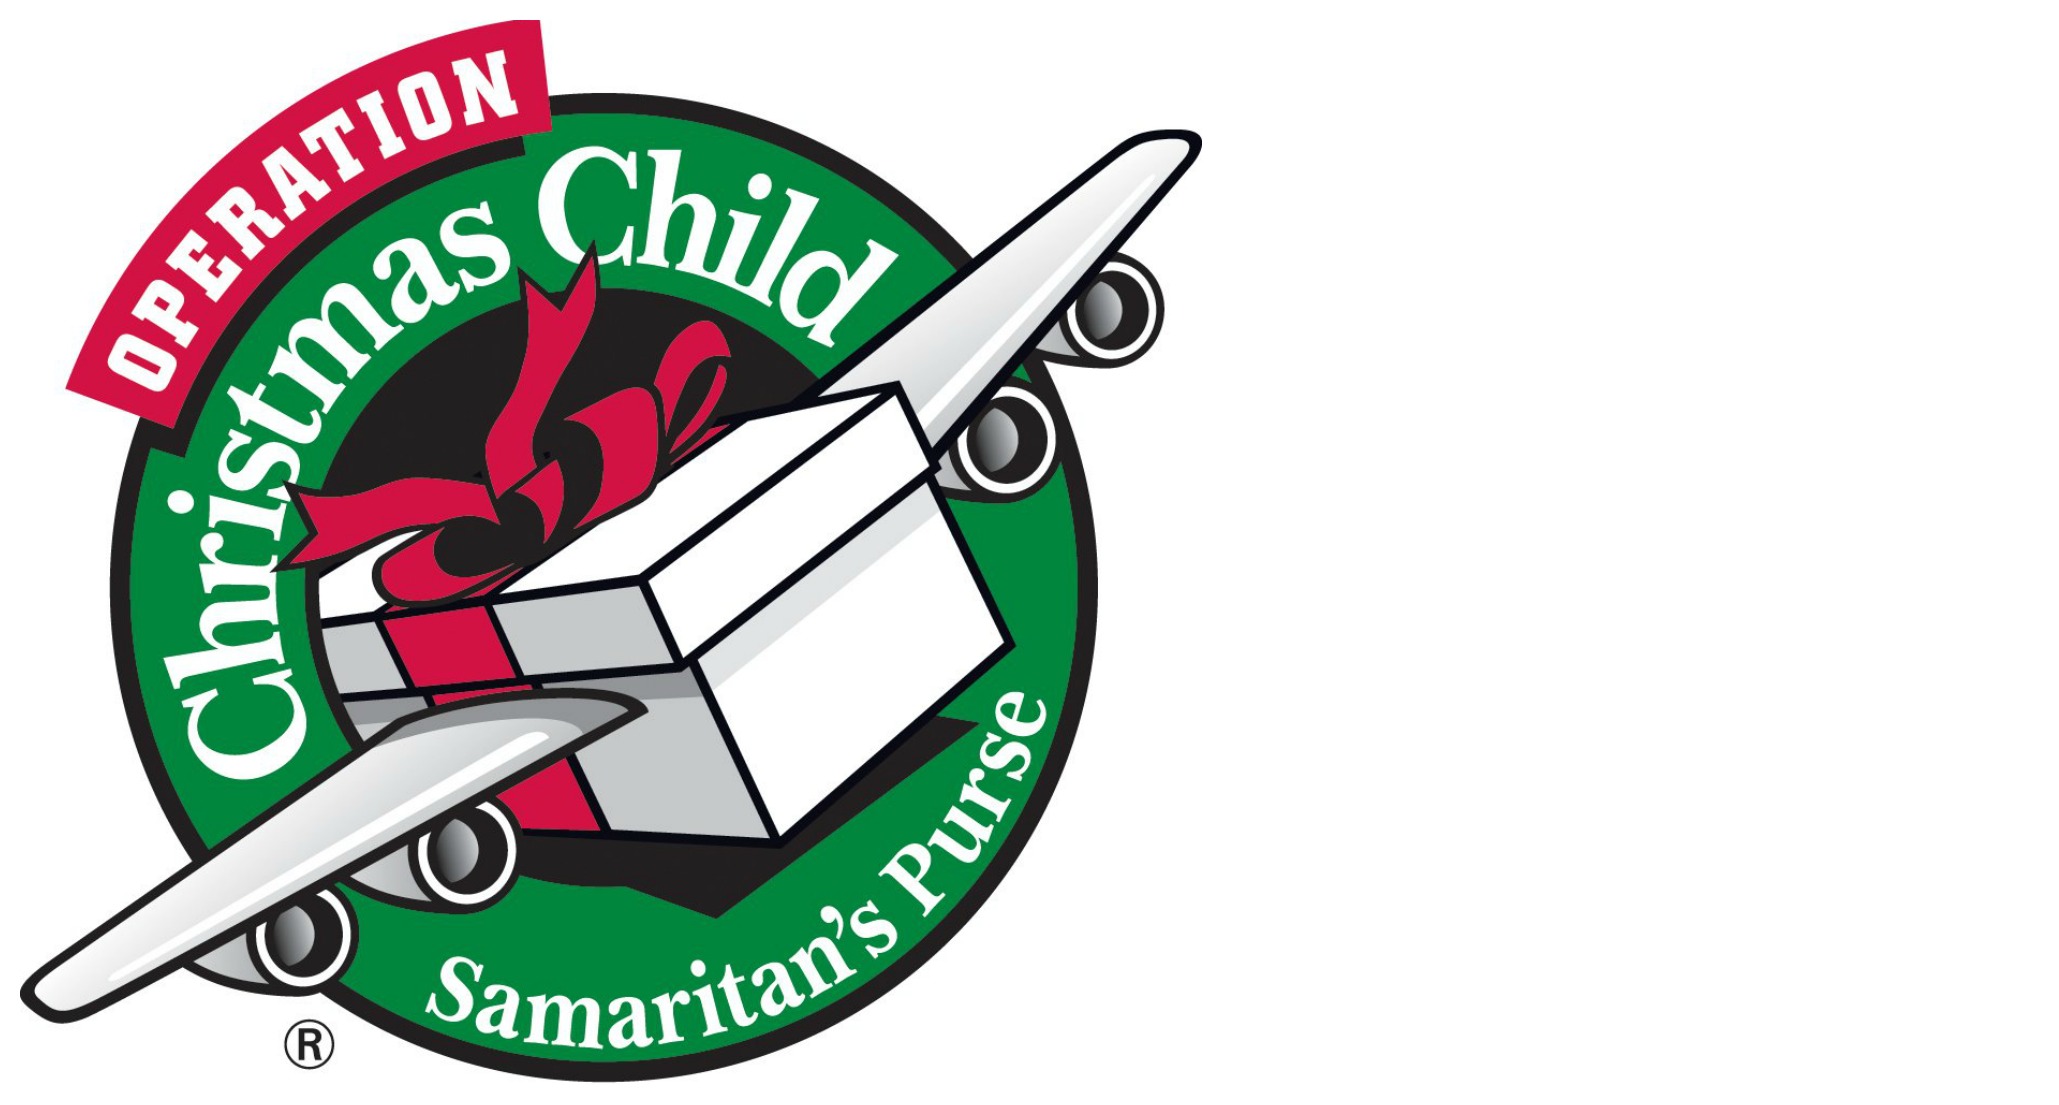 Operation Christmas Child National Collection Week Nov. 14-21